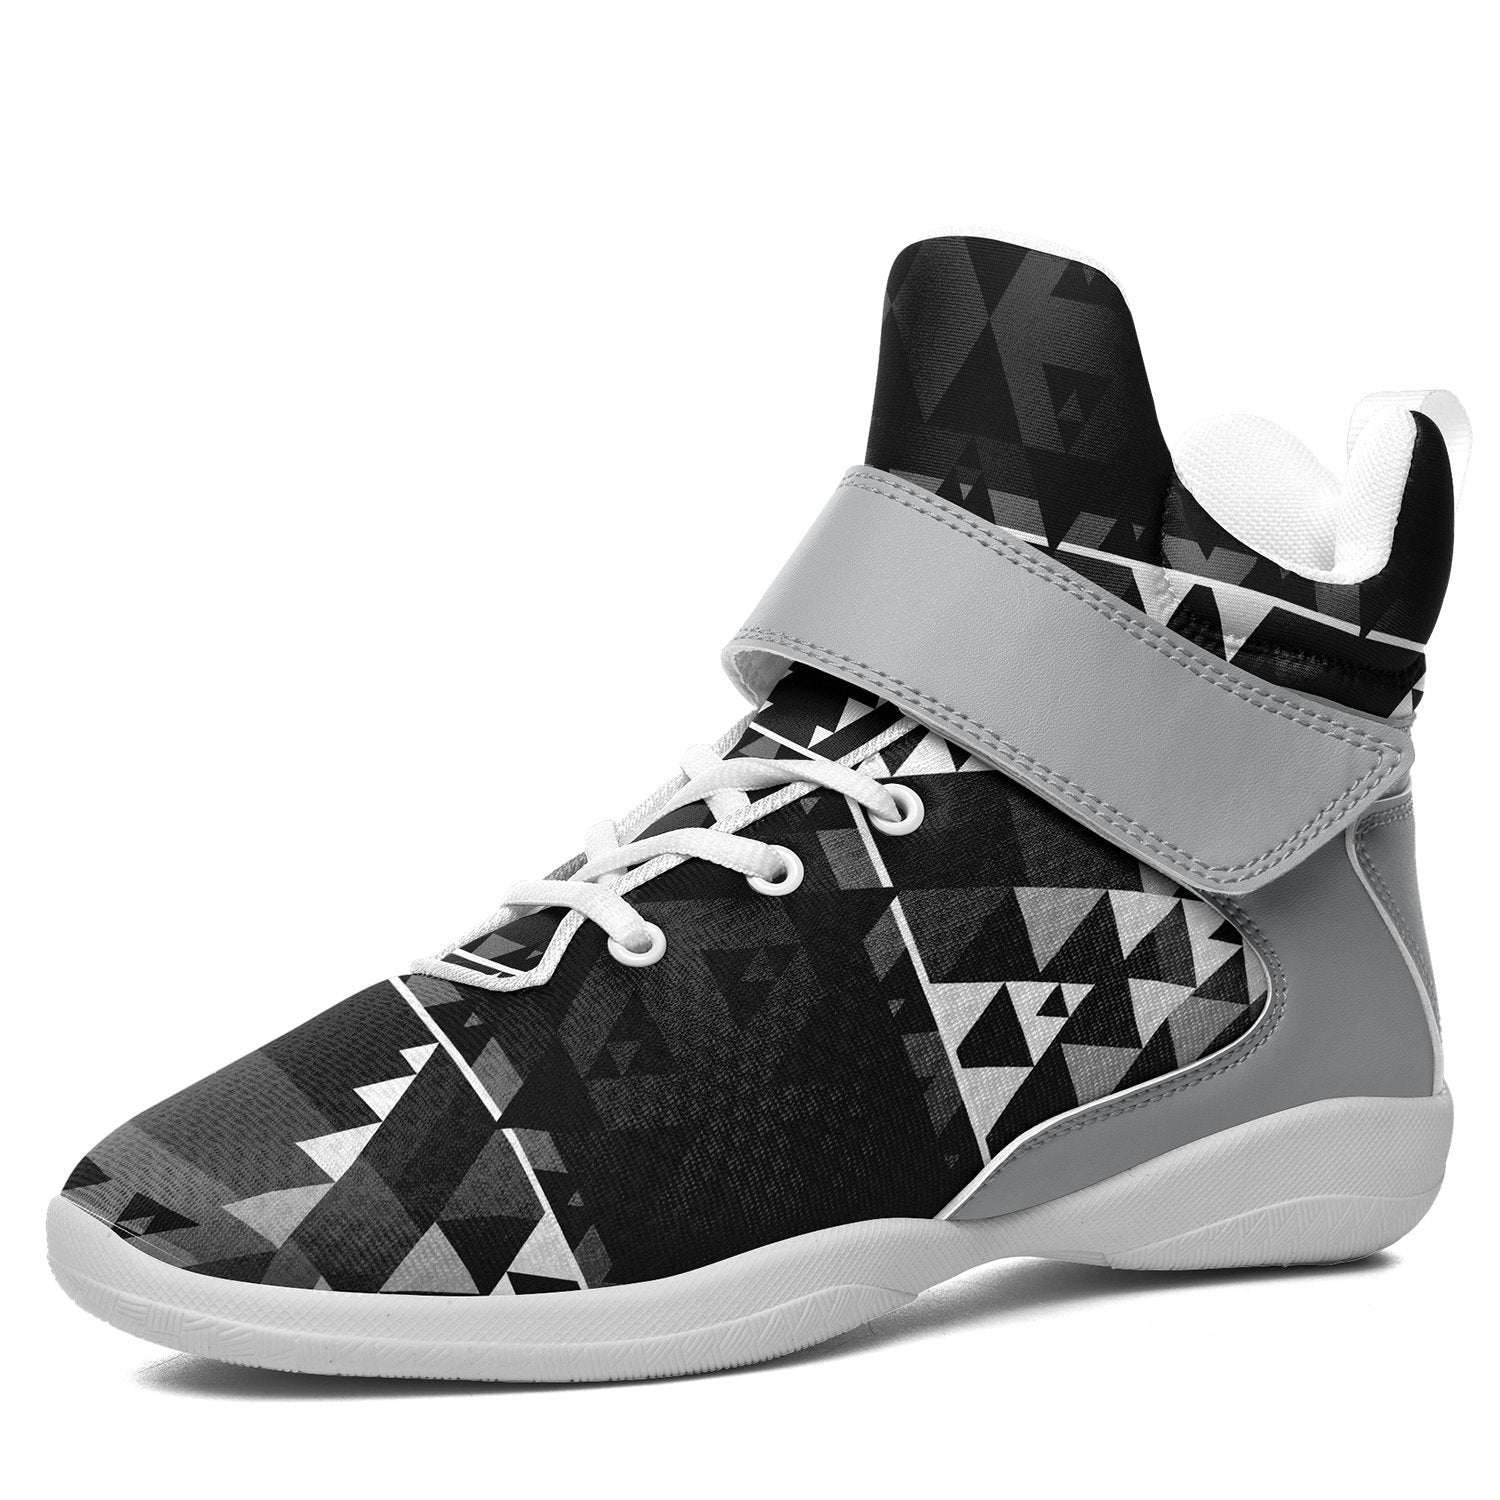 Writing on Stone Black and White Kid's Ipottaa Basketball / Sport High Top Shoes 49 Dzine US Child 12.5 / EUR 30 White Sole with Gray Strap 